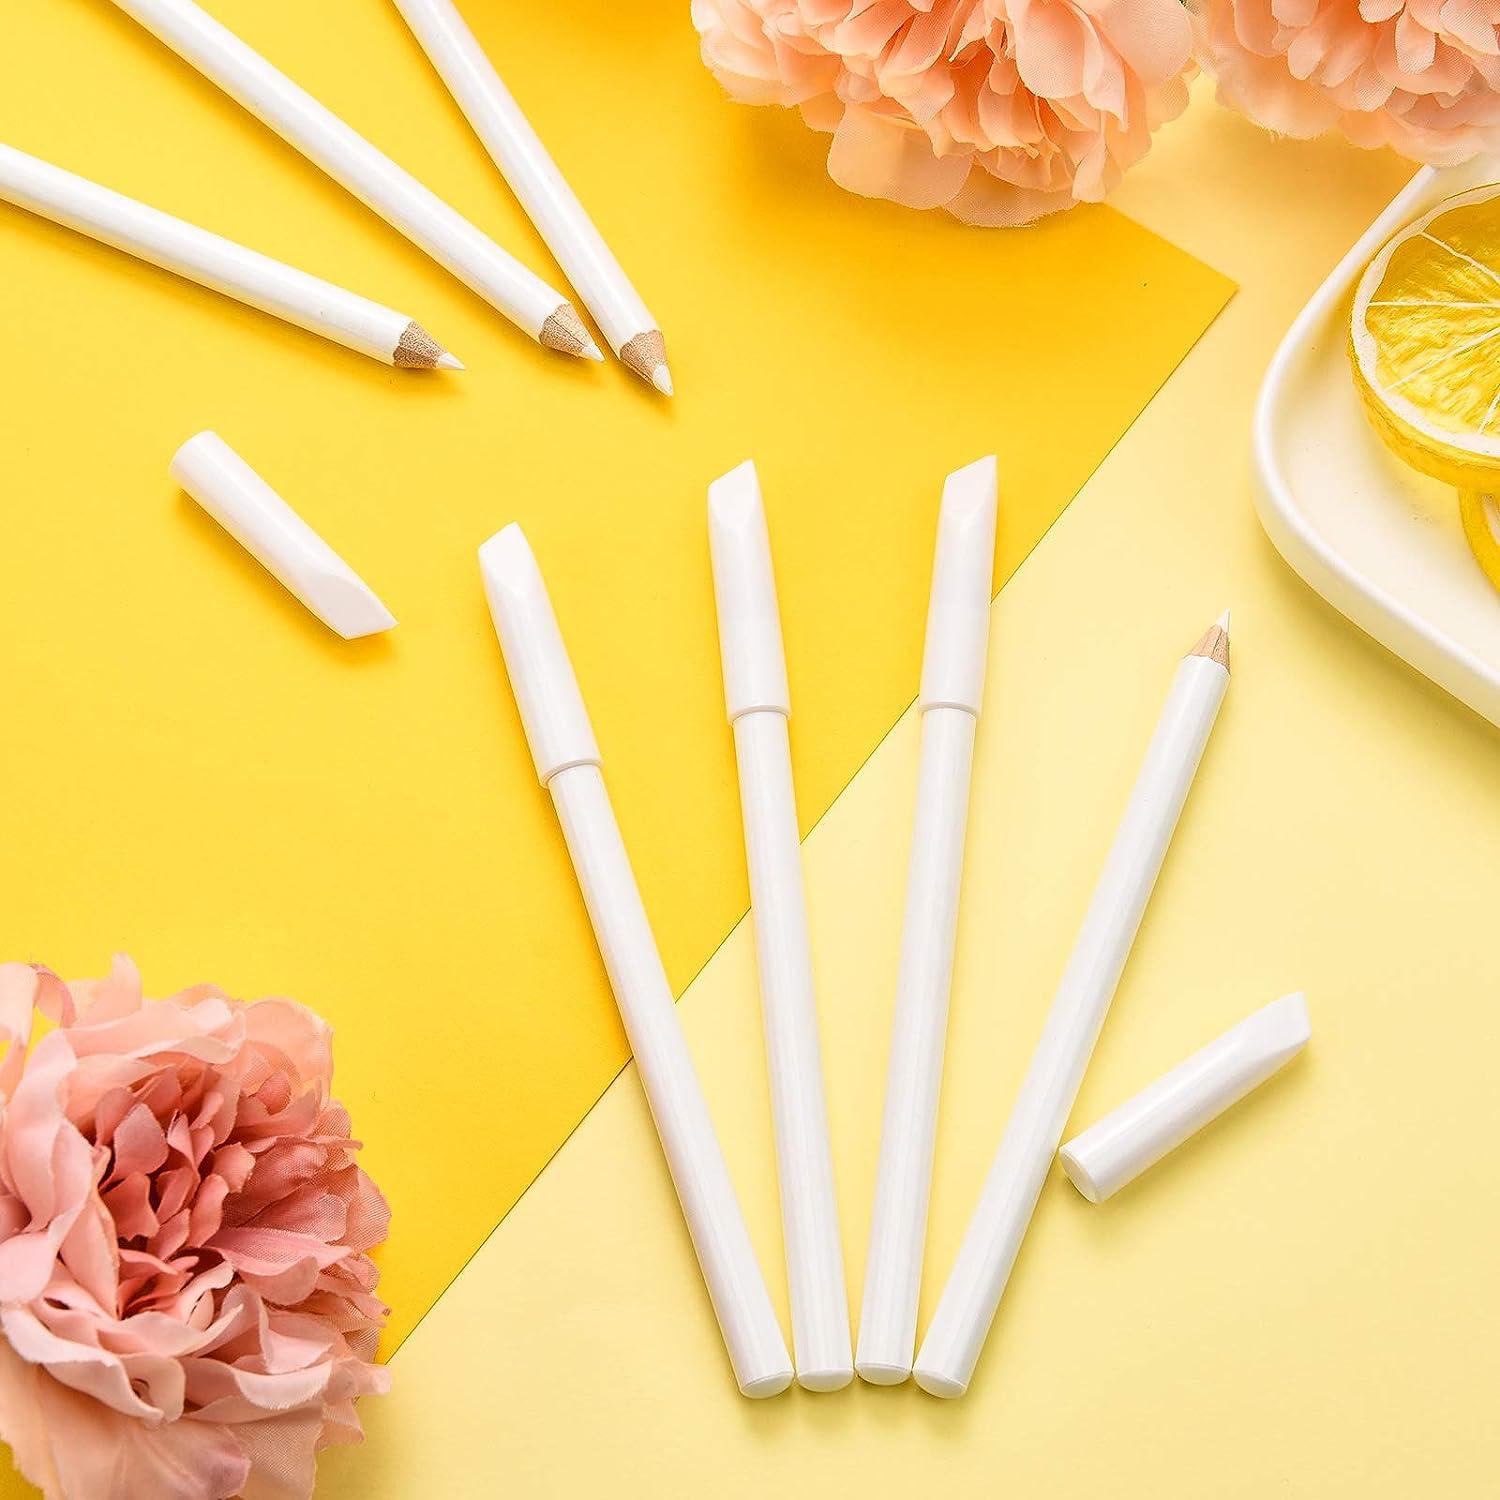  2 Pieces White Nail Pencil Nail Whitener Nail Whitening Pencil  Under Nail French Manicure Pen DIY 2-in-1 Nail Whitener Pencil Manicure  with Cuticle Pusher : Beauty & Personal Care